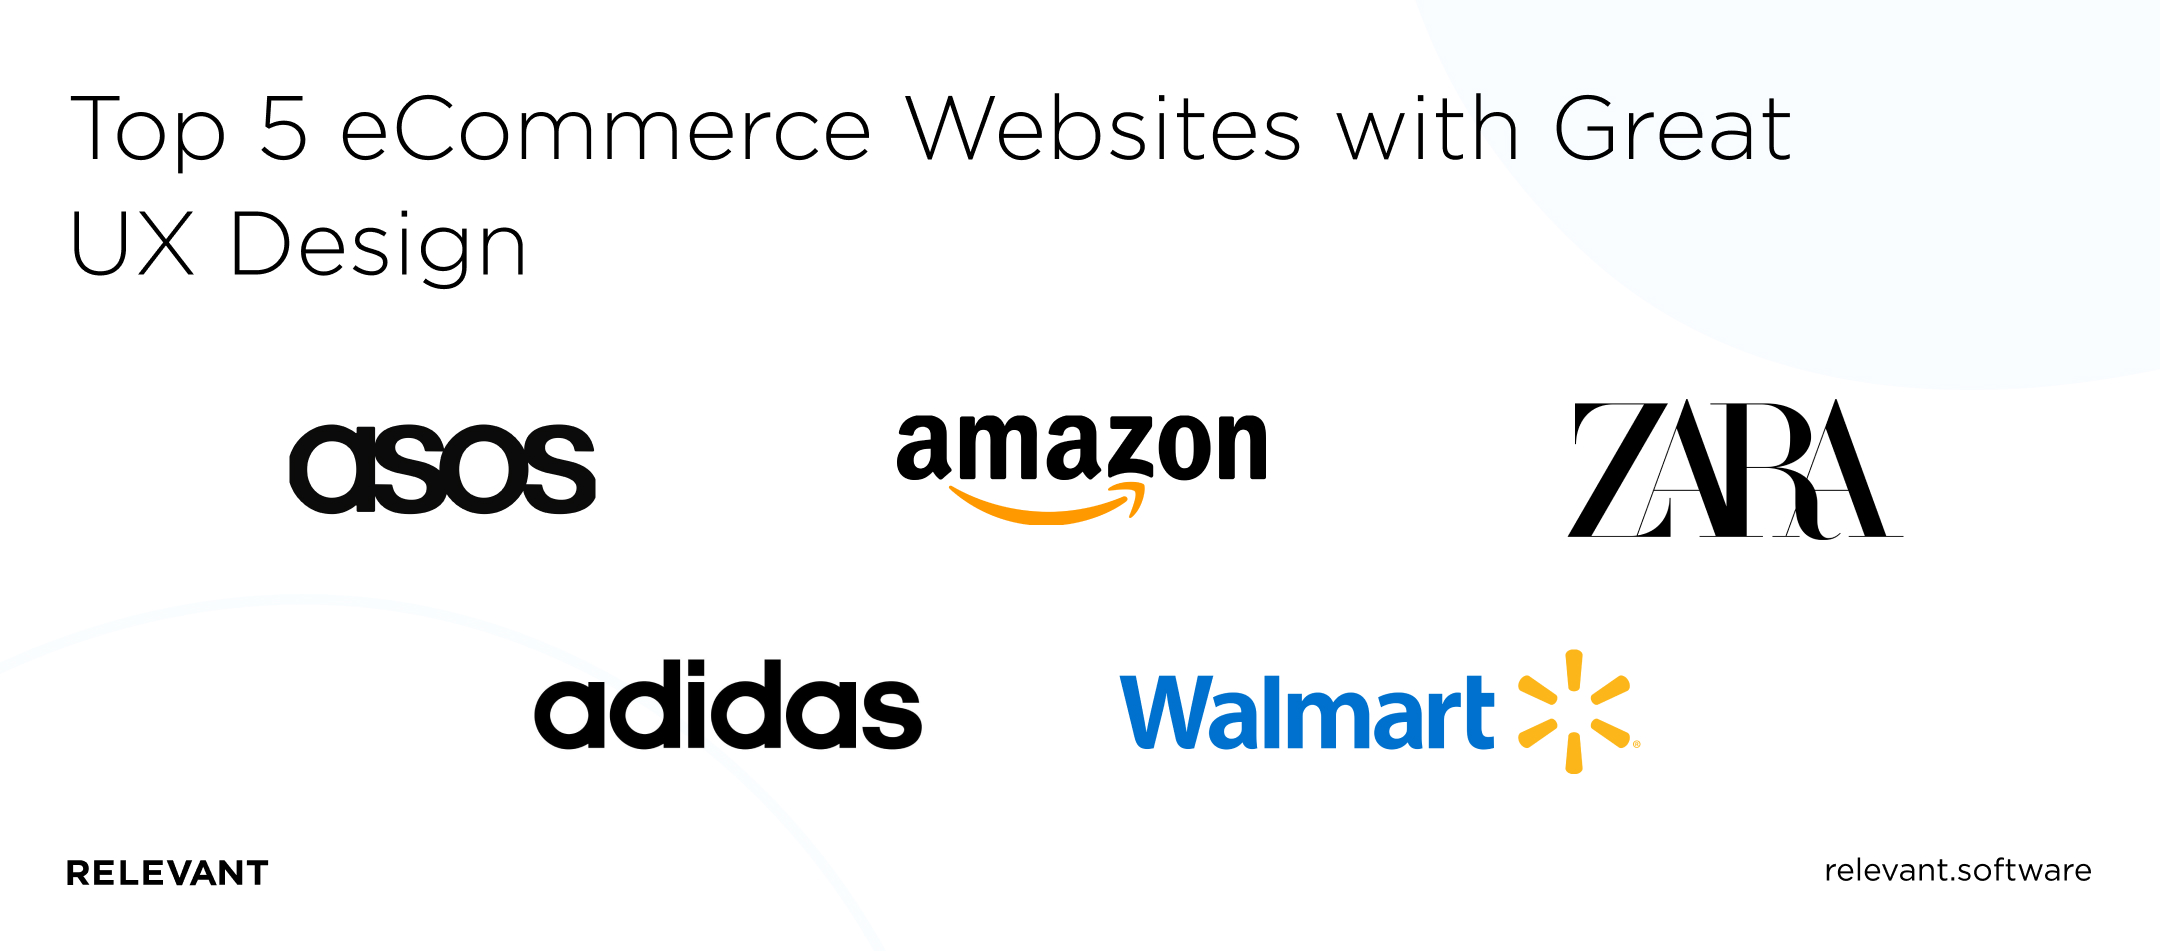 Top 5 eCommerce Websites with Great UX Design